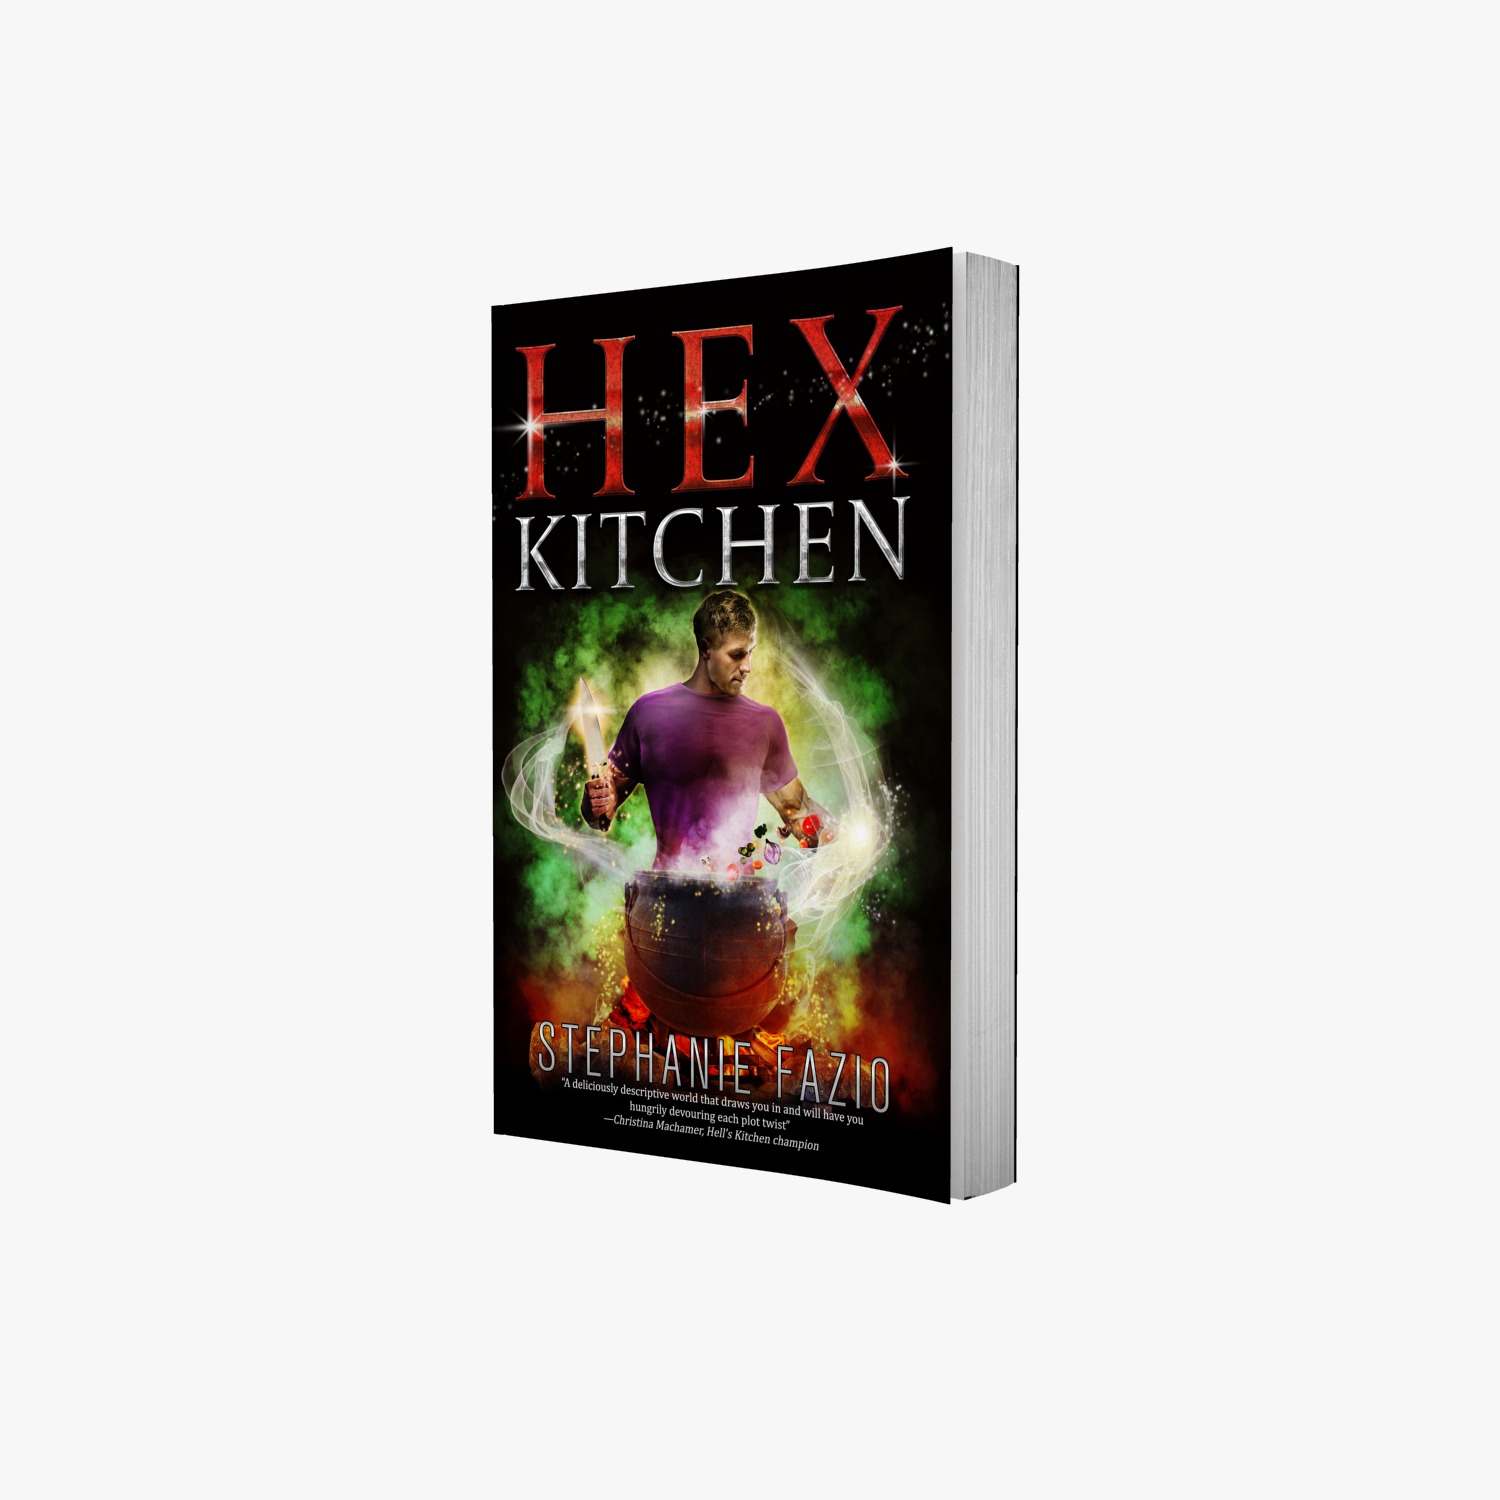 Hex Kitchen: Stephanie Fazio Thrills Readers With A Delicious World Of Culinary Magic, Murder, And Romance